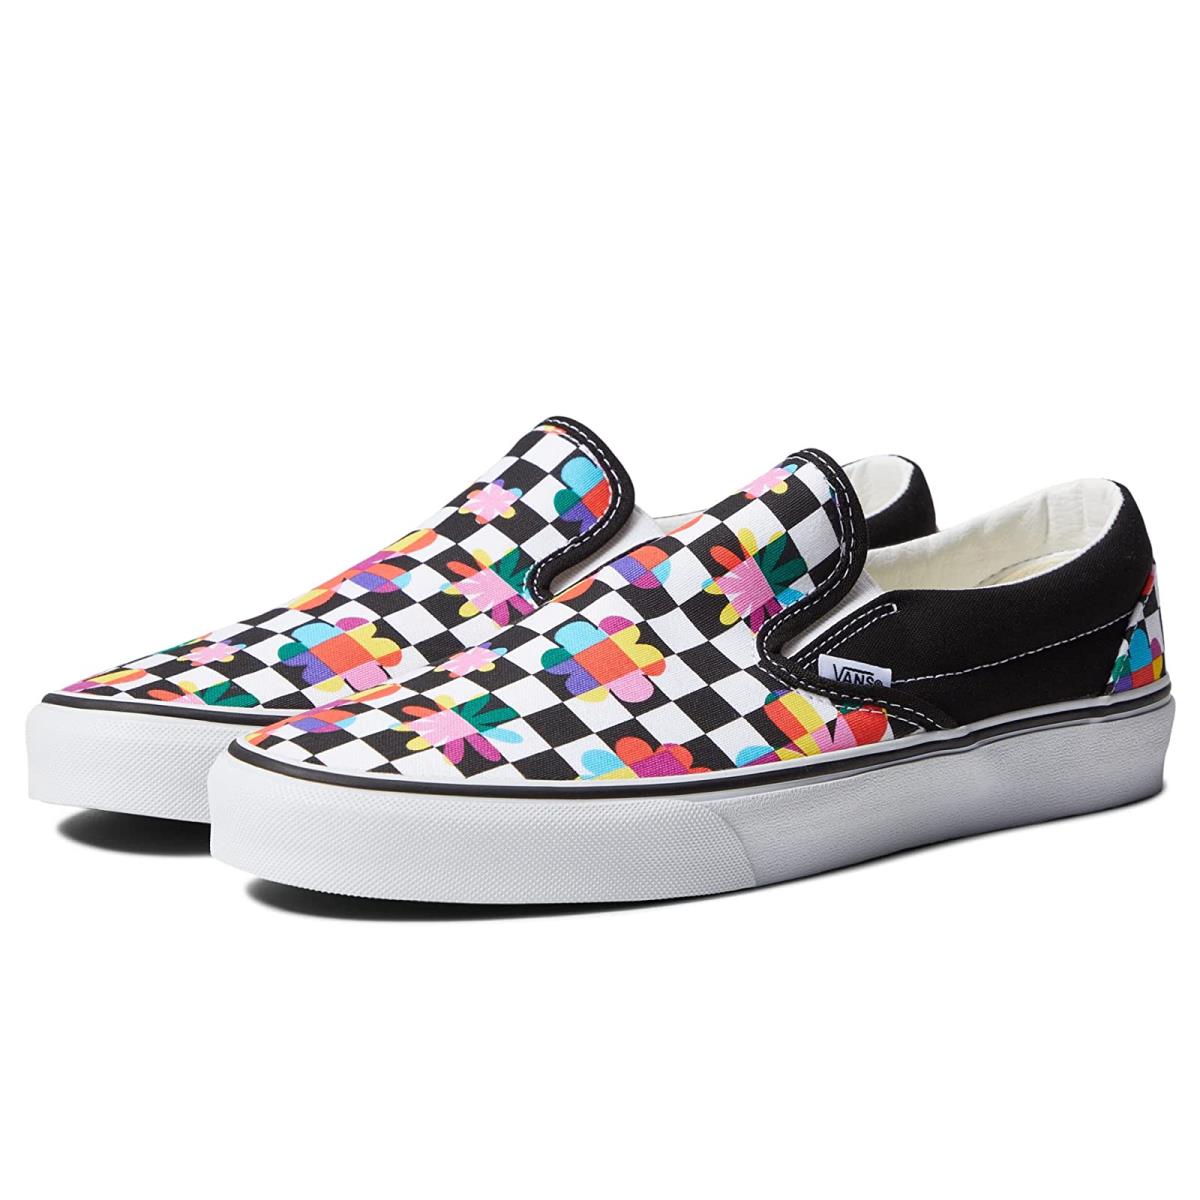 Unisex Sneakers Athletic Shoes Vans Classic Slip-on (Floral Checkerboard) Black/True White